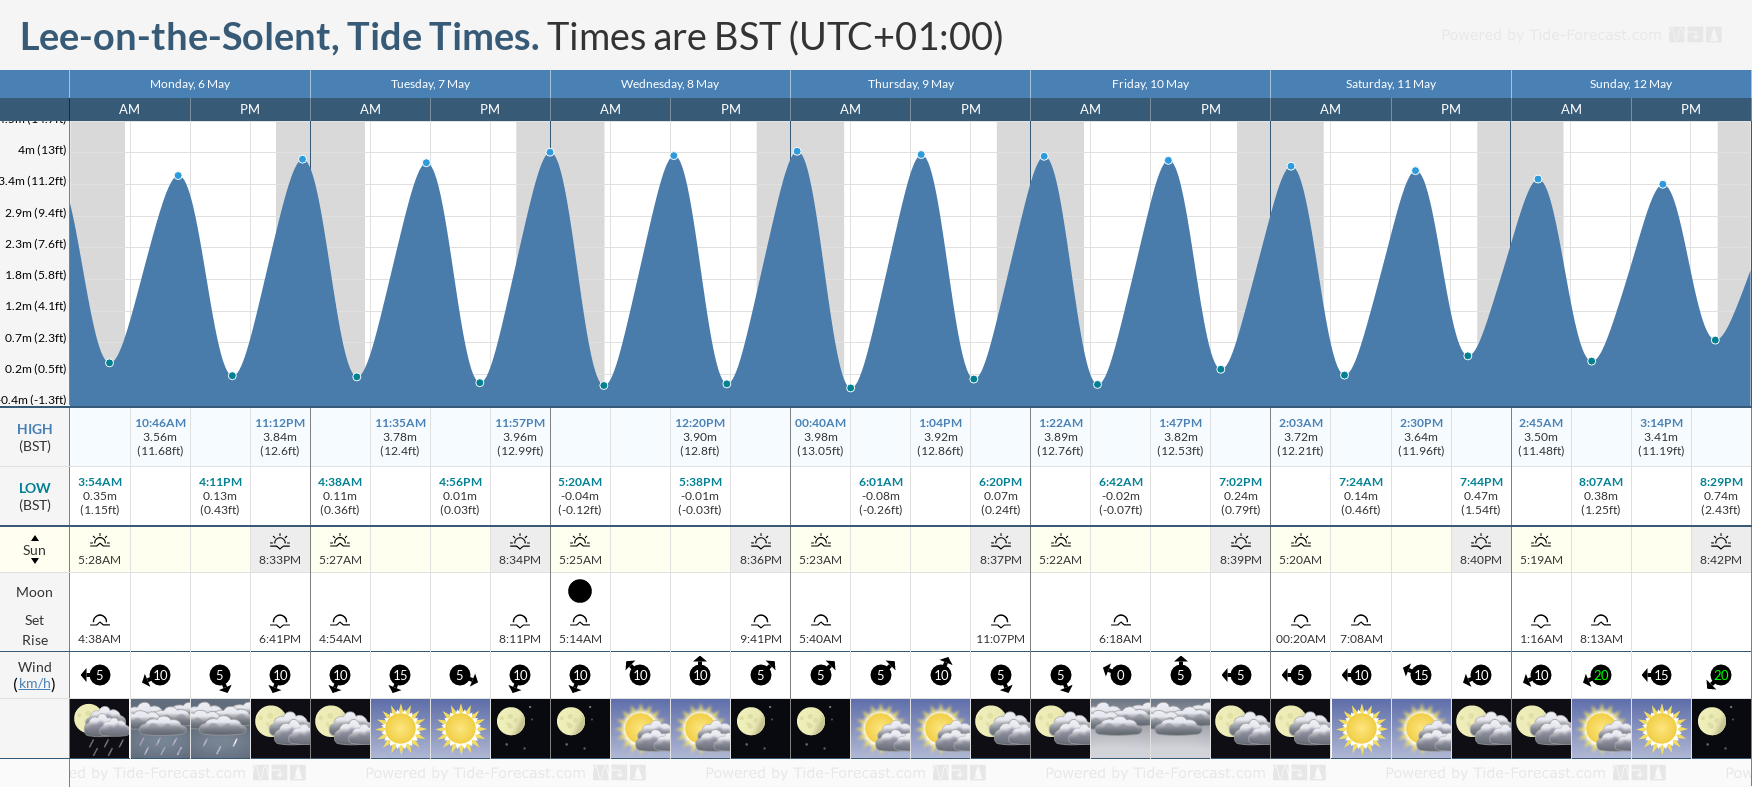 Lee-on-the-Solent Tide Chart including high and low tide tide times for the next 7 days